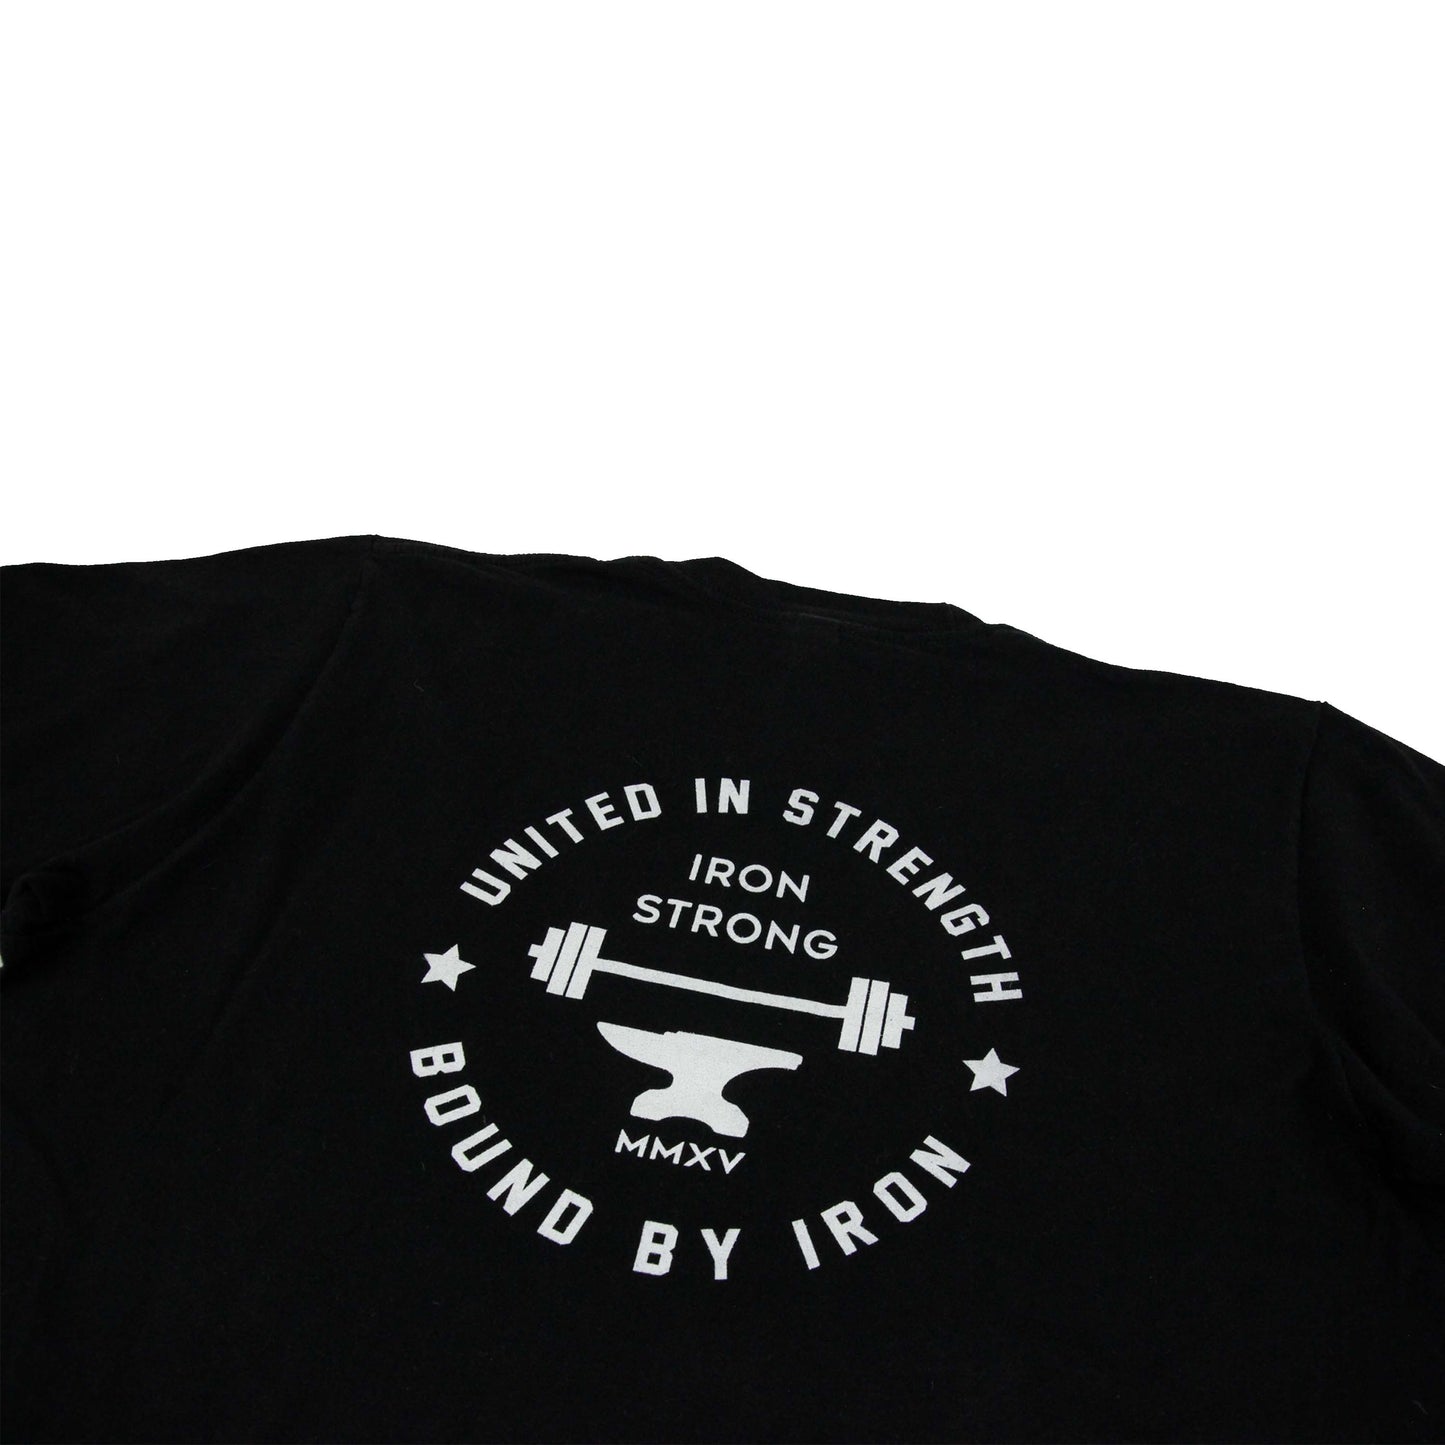 The 'Iron Crest' Weightlifting shirt | Iron Strong Apparel